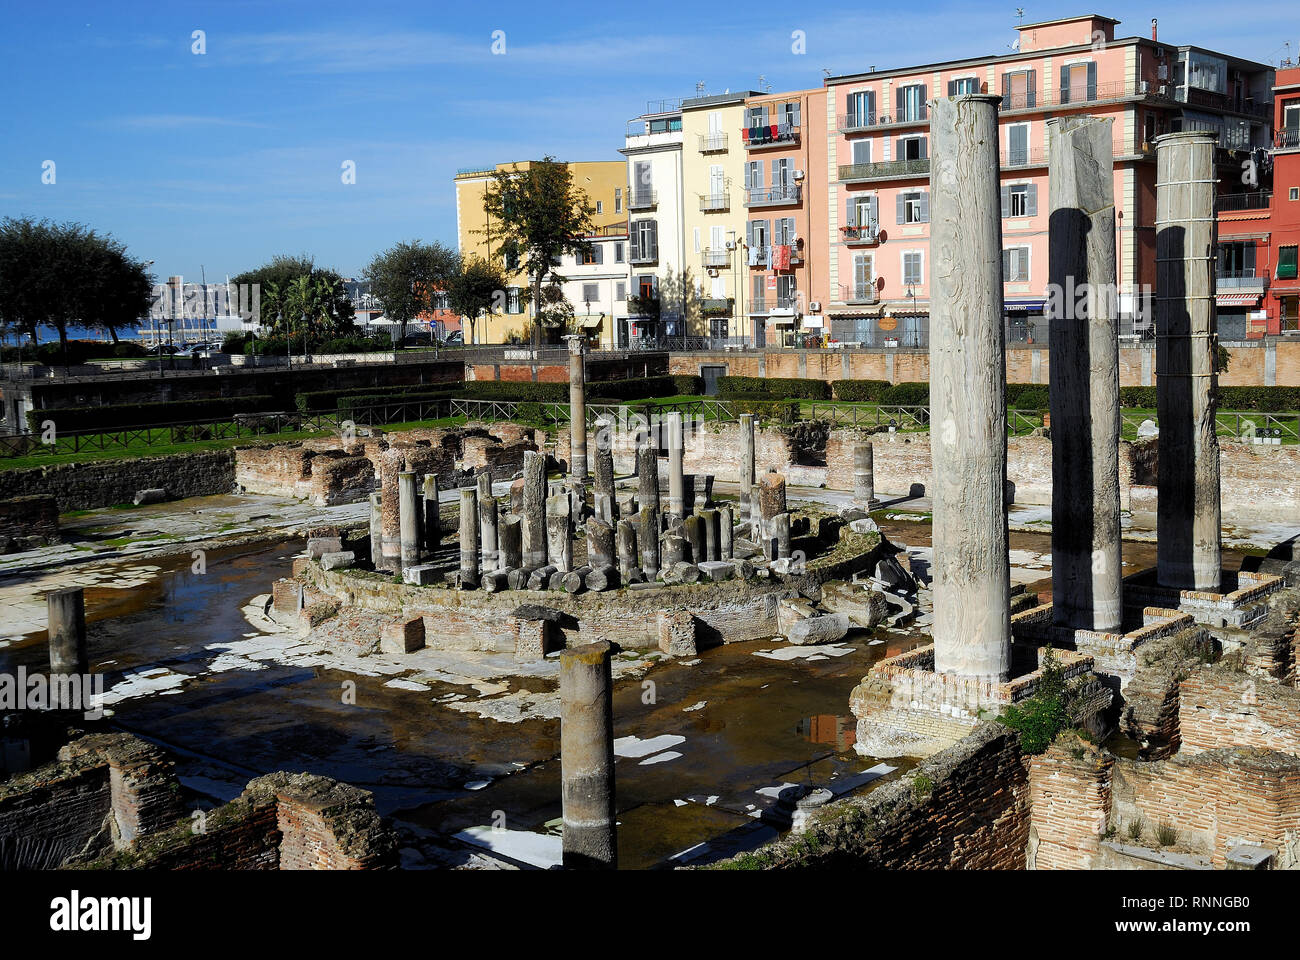 Pozzuoli, Campania, Italy. The Macellum : it  was the macellum or market building of the Roman colony of Puteoli, now the city of Pozzuoli in southern Italy. When first excavated in the 18th century, the discovery of a statue of Serapis led to the building being misidentified as the city's serapeum or Temple of Serapis. The Macellum is periodically submerged in part by the sea due to the bradyseism of volcanic origin that affects the Phlegraean Fields. The level reached by the water is visible on the columns. The holes left by the Lithophaga molluscs are also visible on the columns. Stock Photo